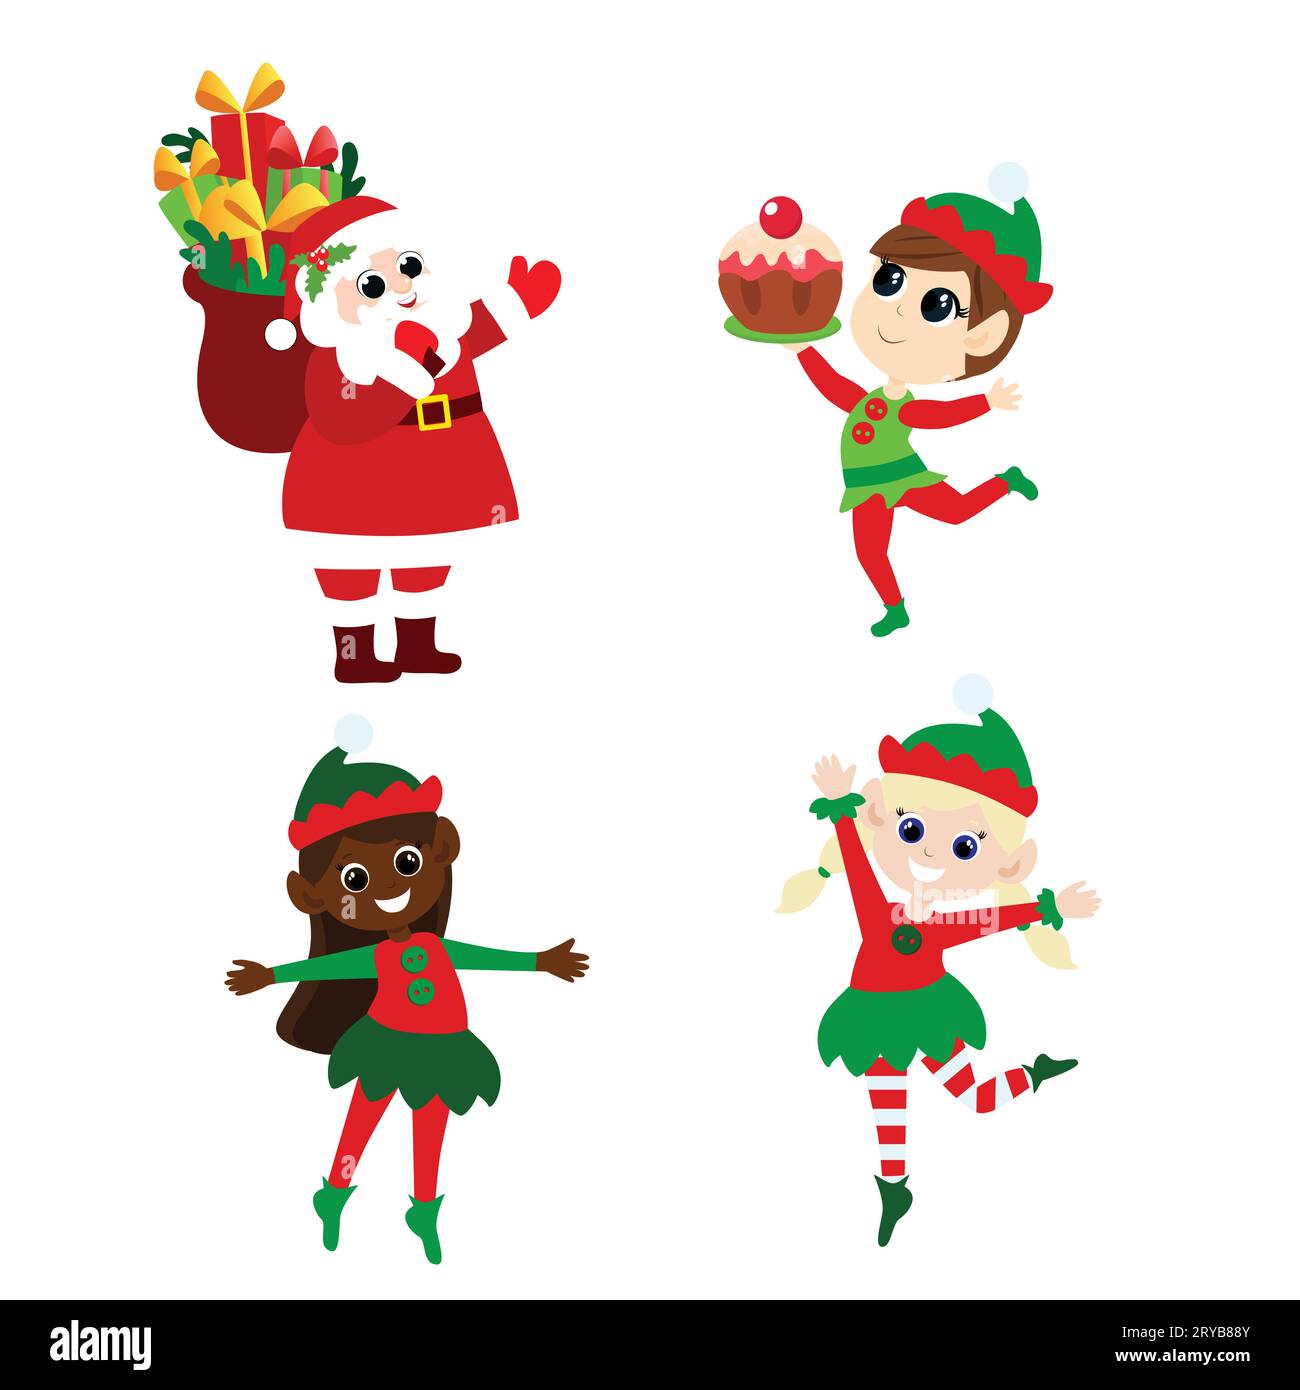 Set of Santa Claus and elves in cartoon style isolated on white background. Cute and positive Christmas characters. Stock Vector